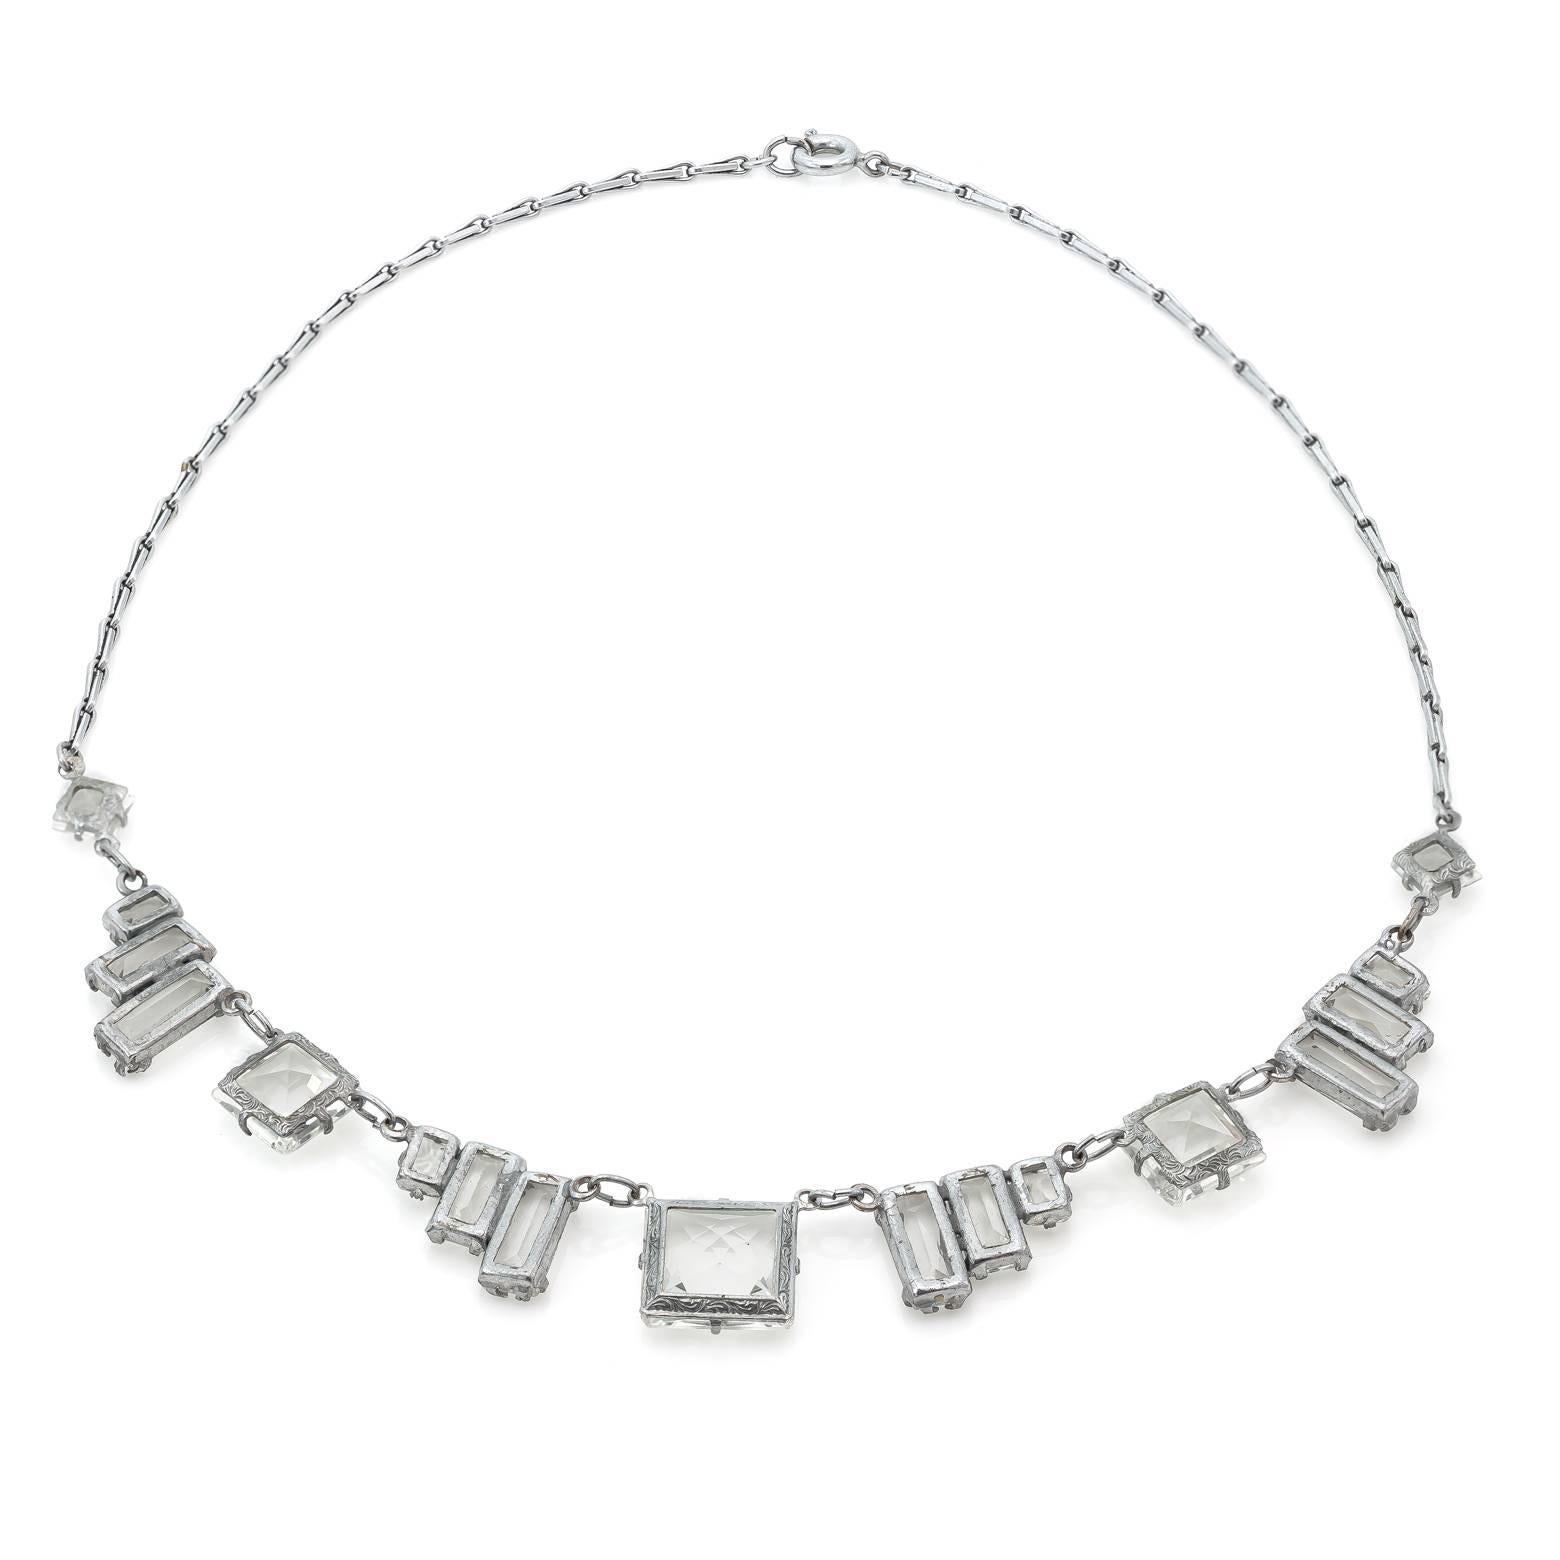 This exquisite Art Deco necklace is austere and modern. The glamorous angles create a unique look that is both classic and exciting. The quartz crystals are faceted and reflect light in beautiful colors and the sterling silver chain links are bold. 